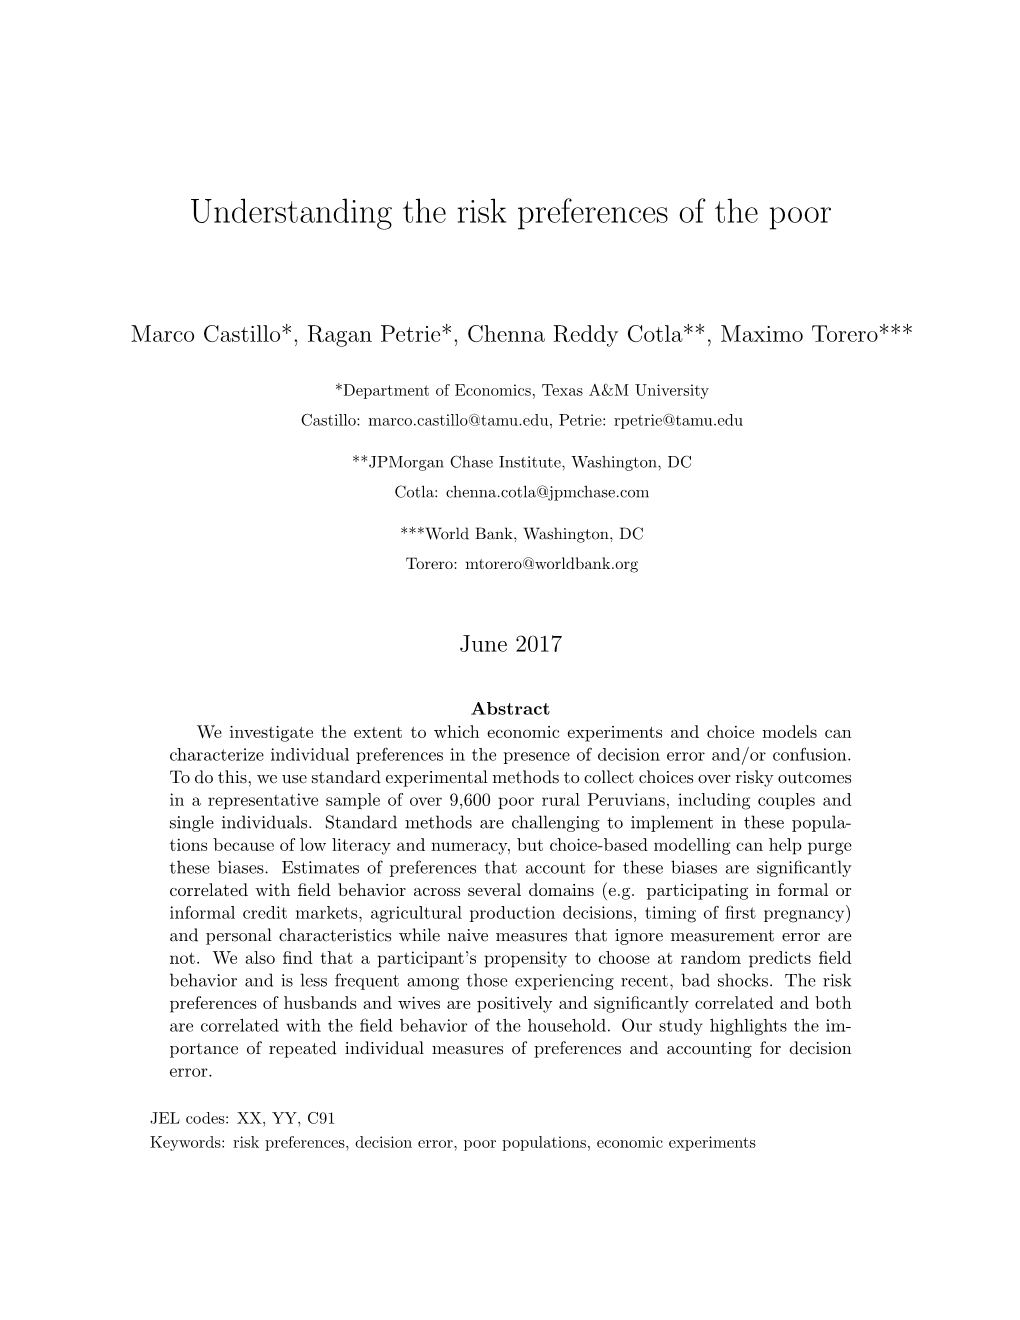 Understanding the Risk Preferences of the Poor